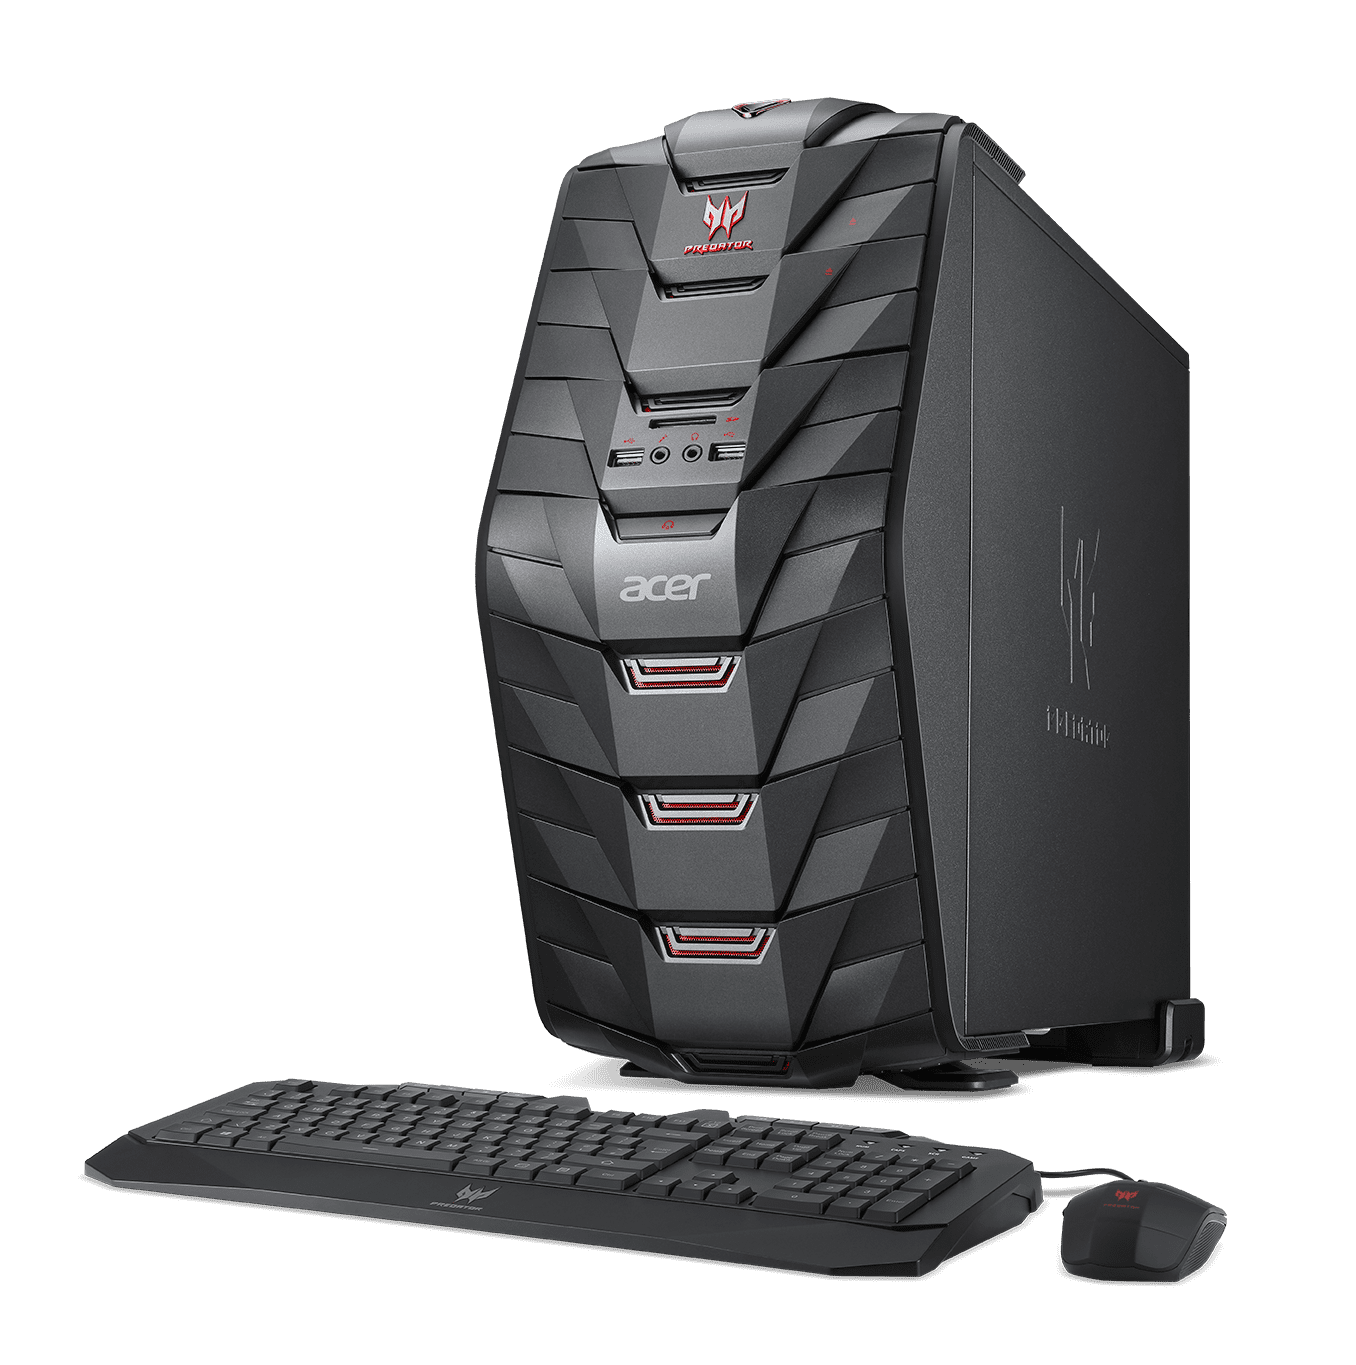 Acer Predator AG3-710-UW11 Desktop PC with Intel Core i5-6400 Processor, Memory, 1TB Hard Drive and Windows 10 Home (Monitor Not Included) - Walmart.com